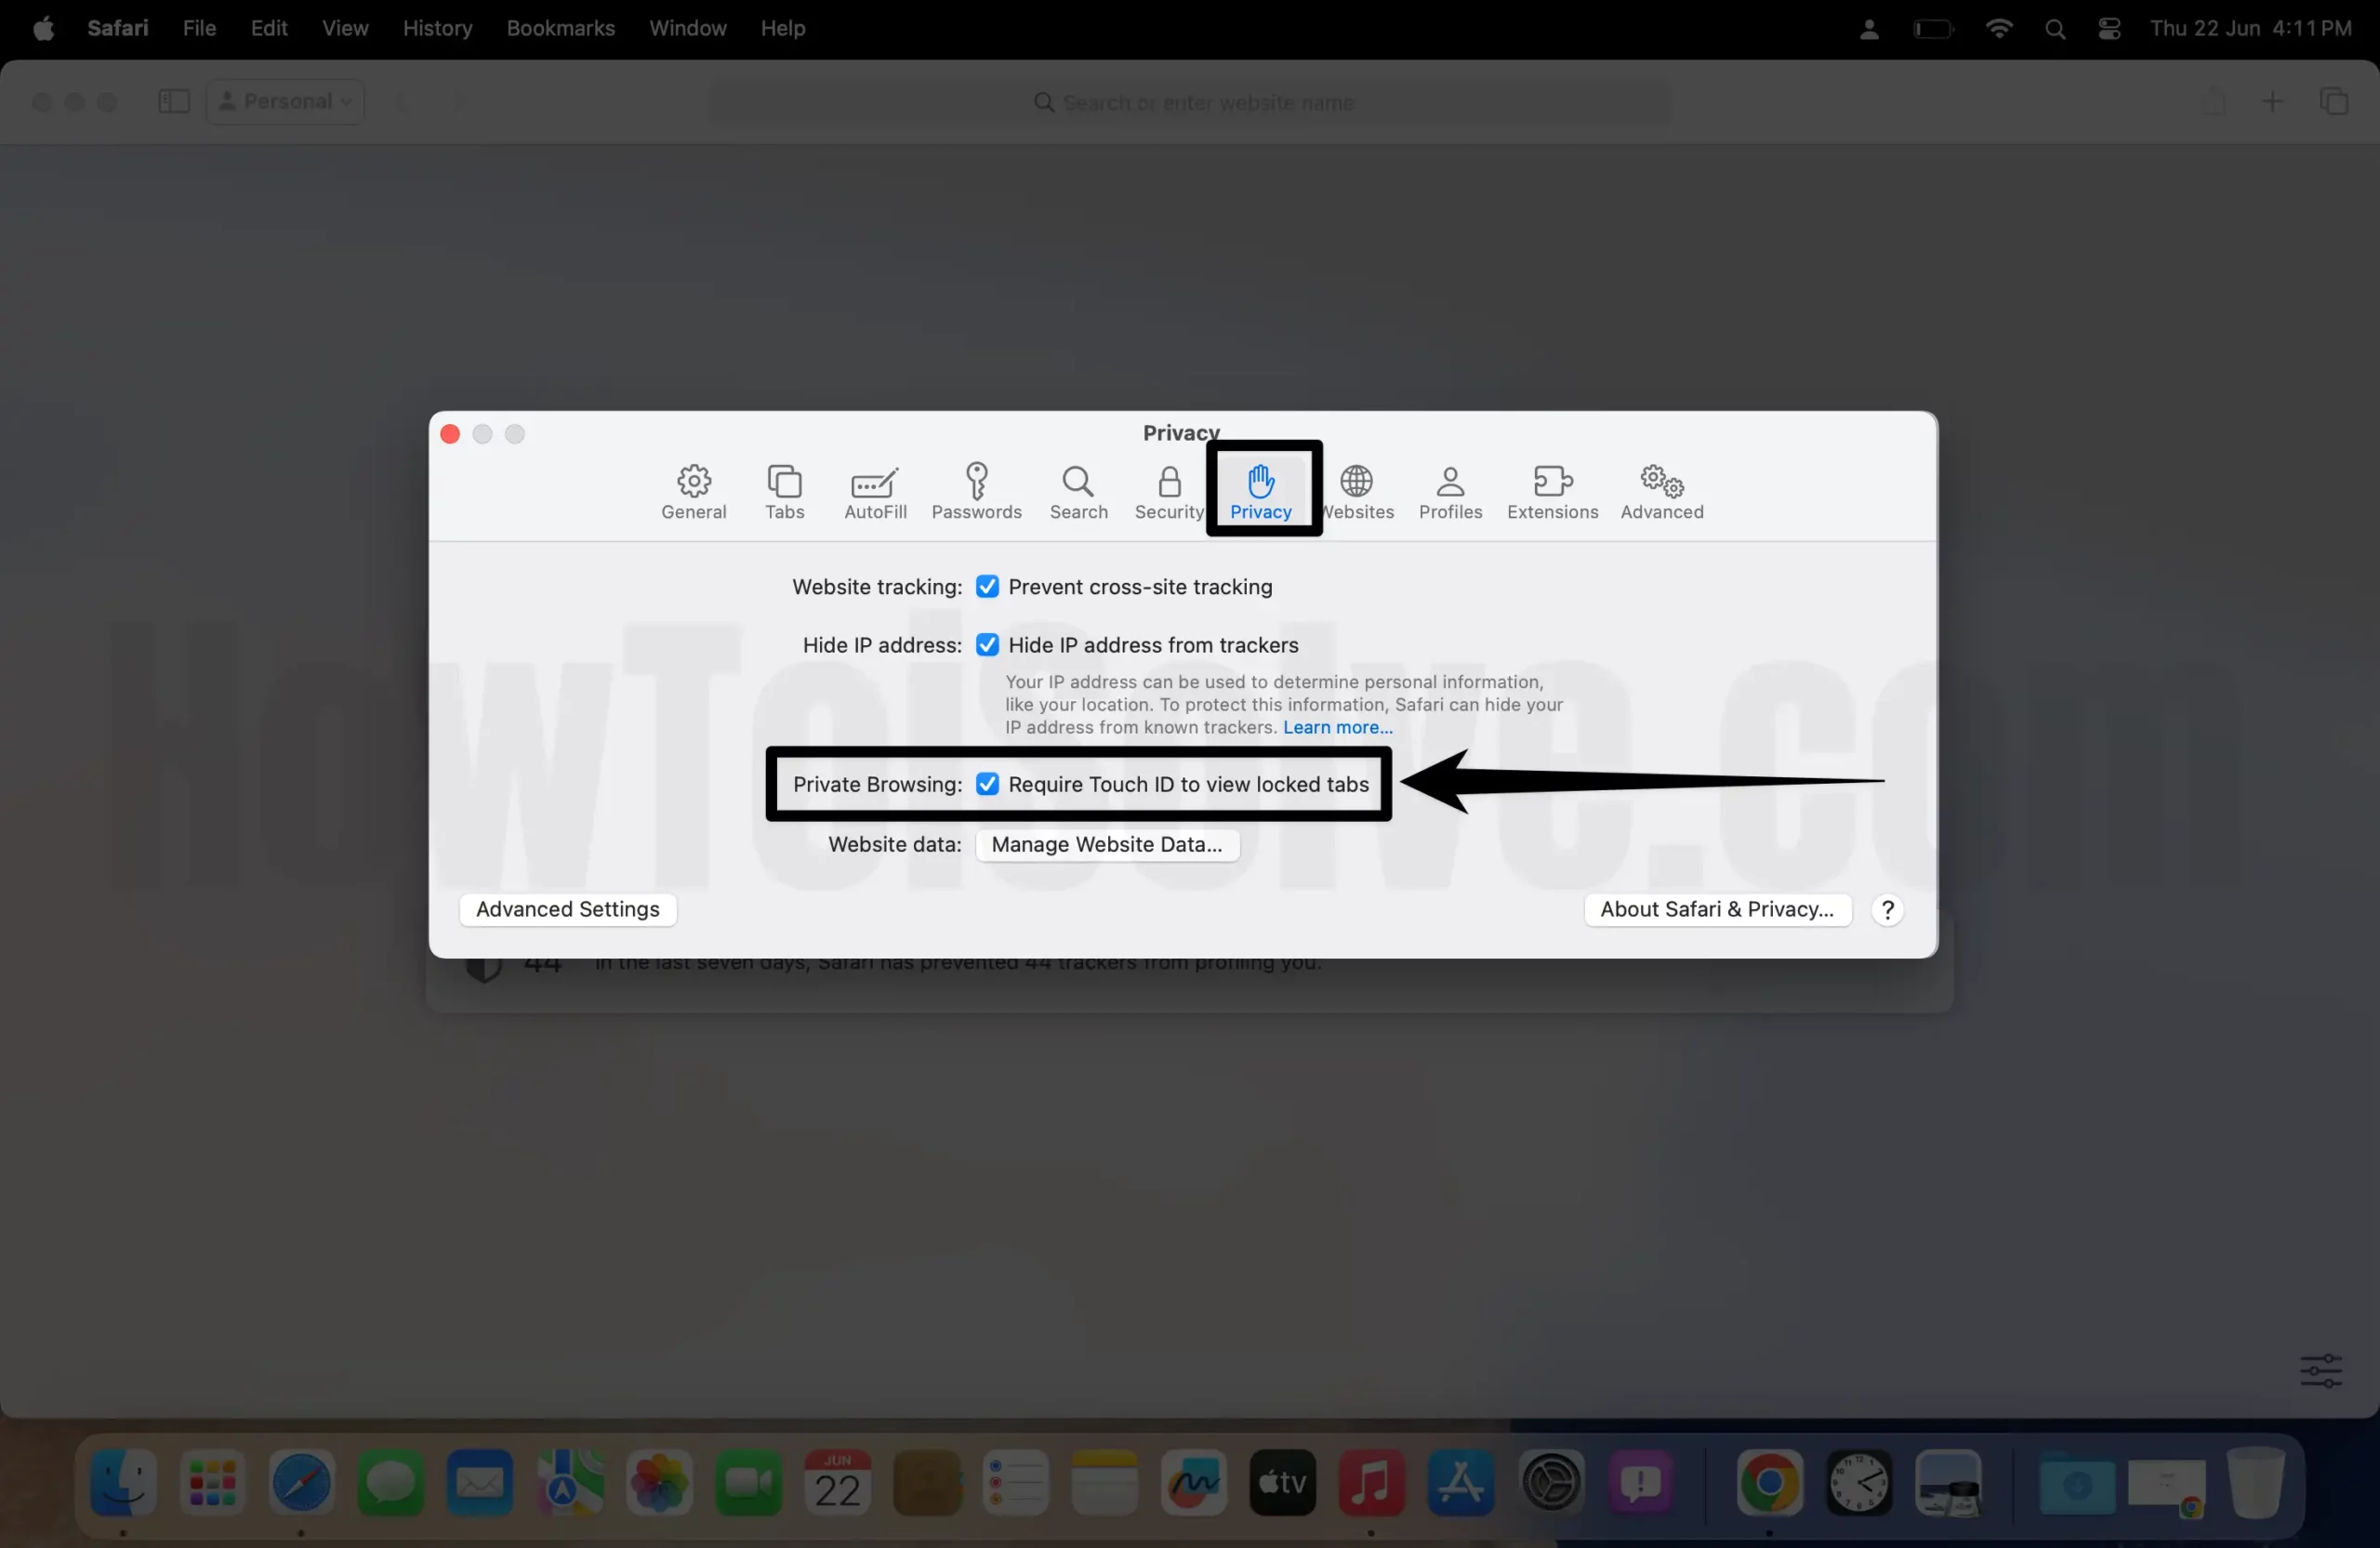 Enable Touch ID to View Locked Tabs on Mac